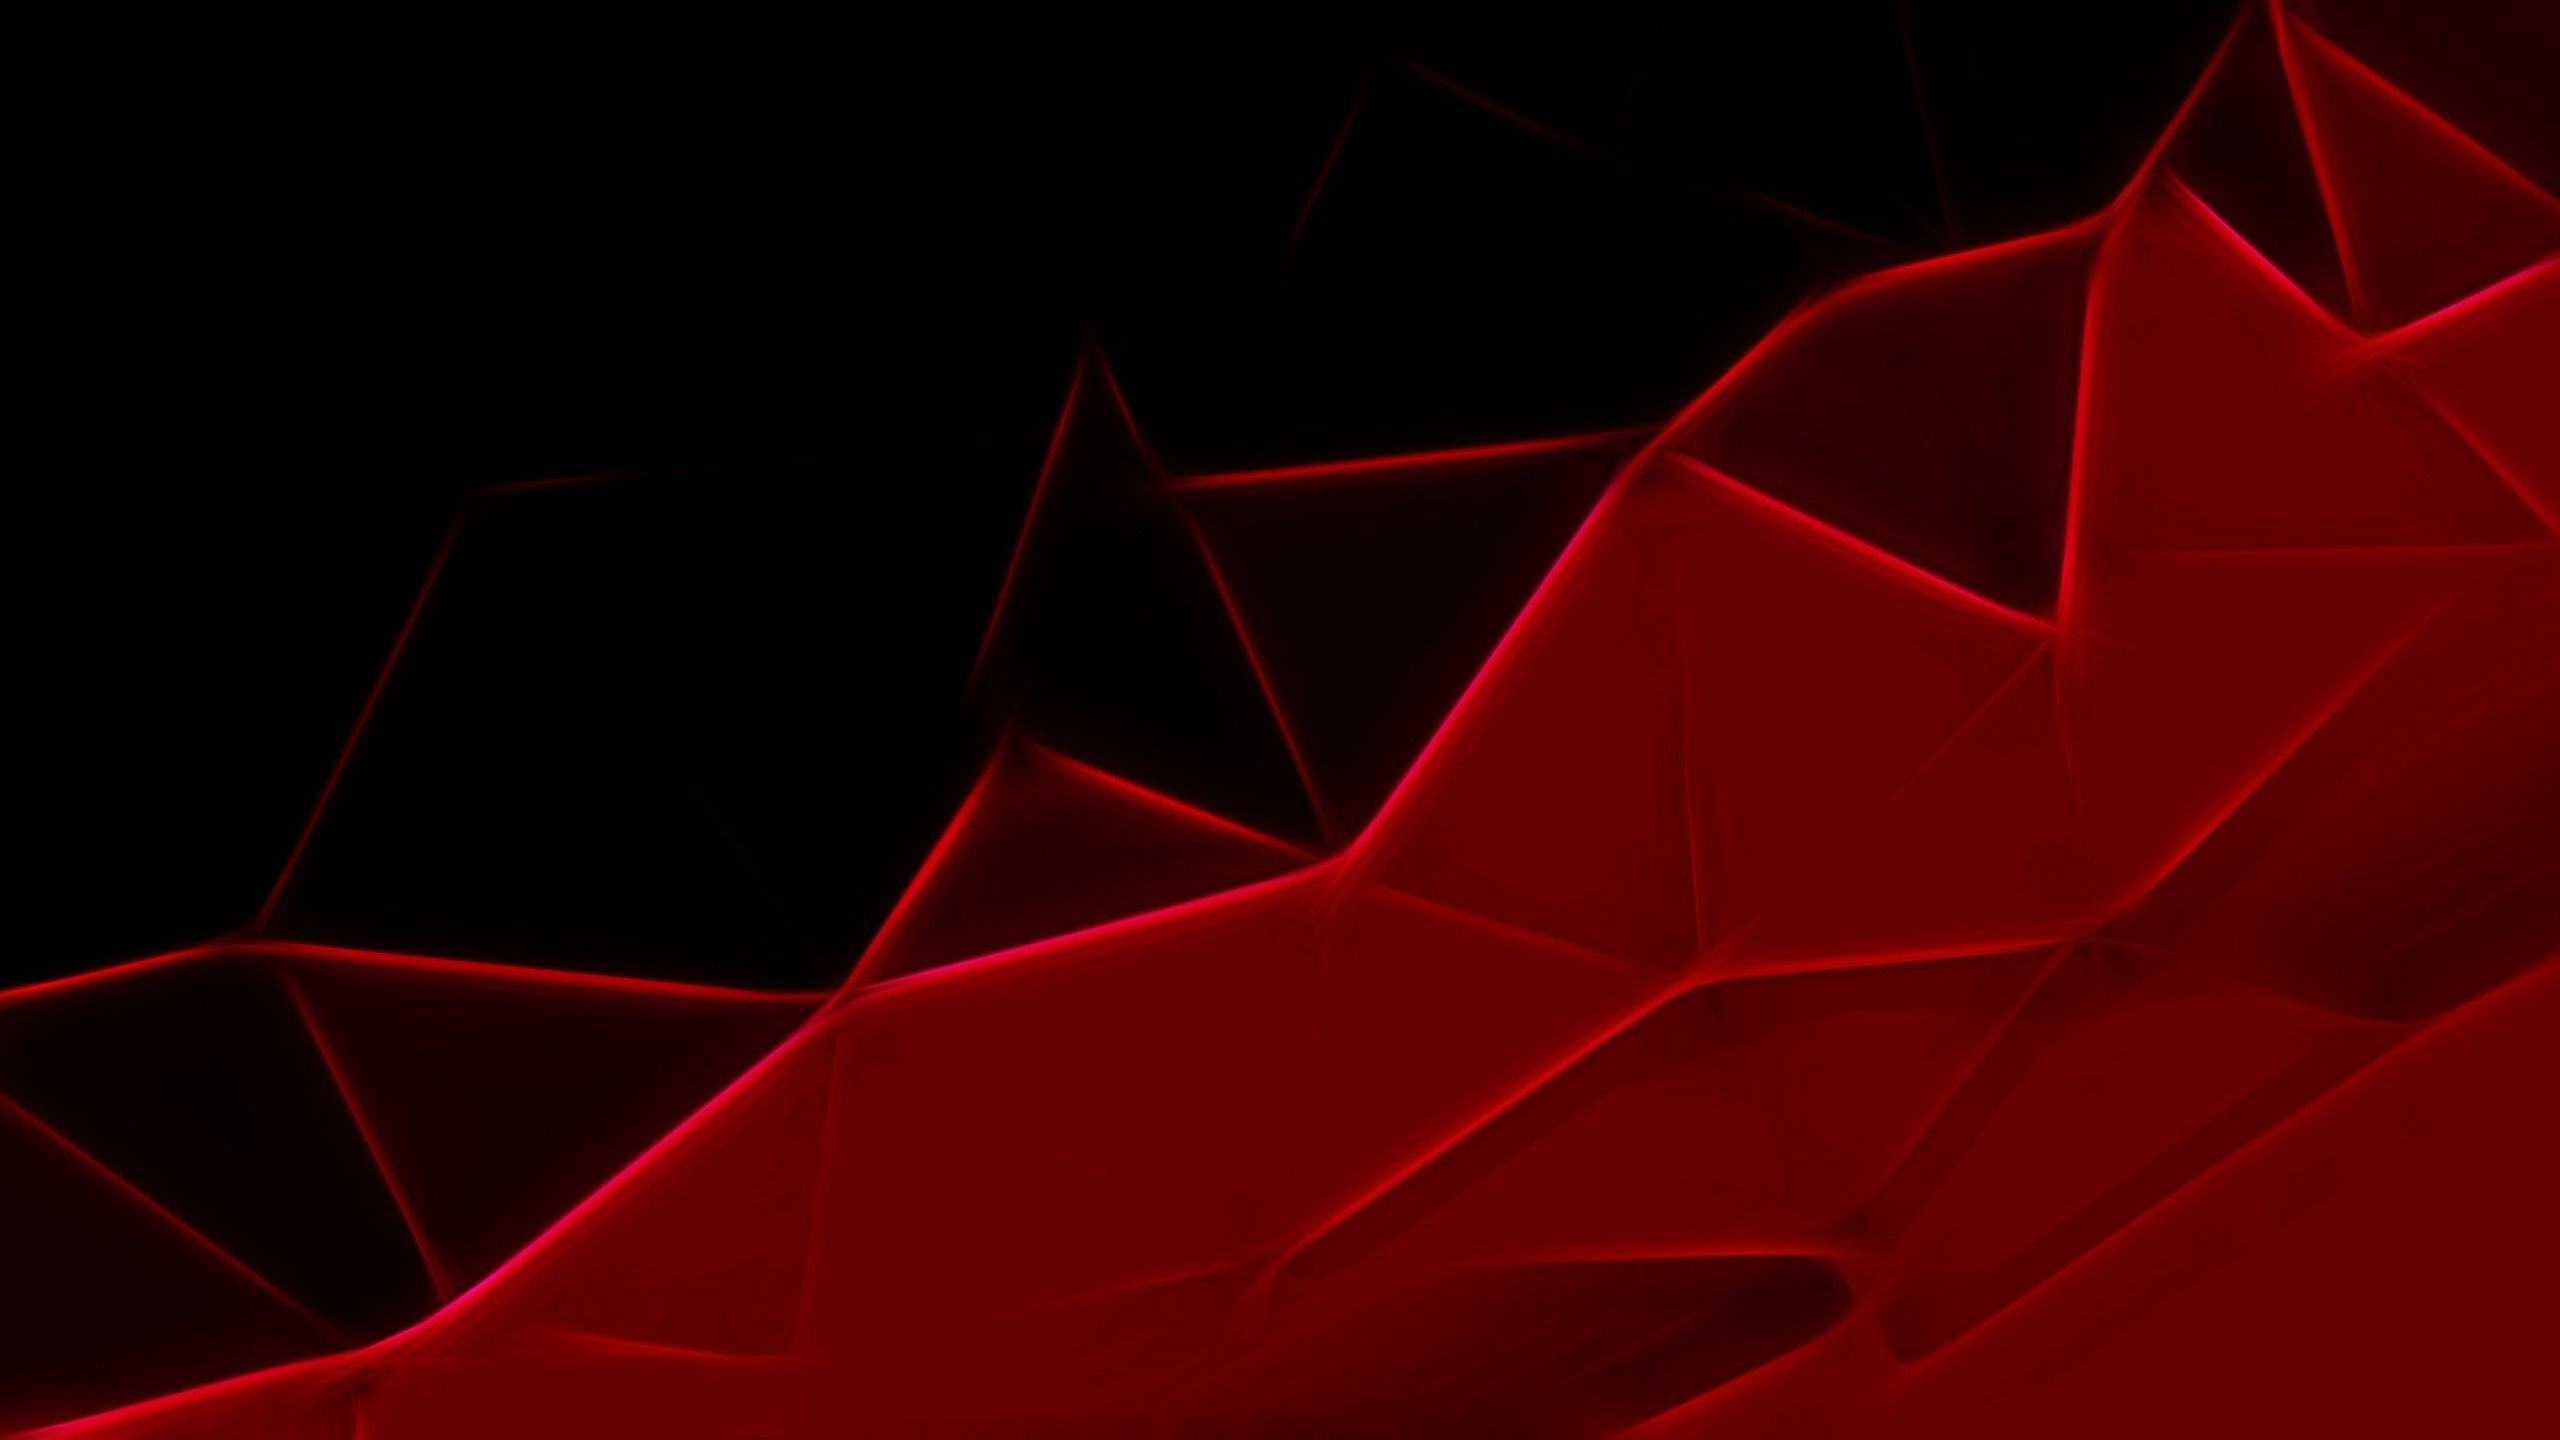 Download 2560x1440 Red Triangles, Geometric Wallpaper for iMac 27 inch